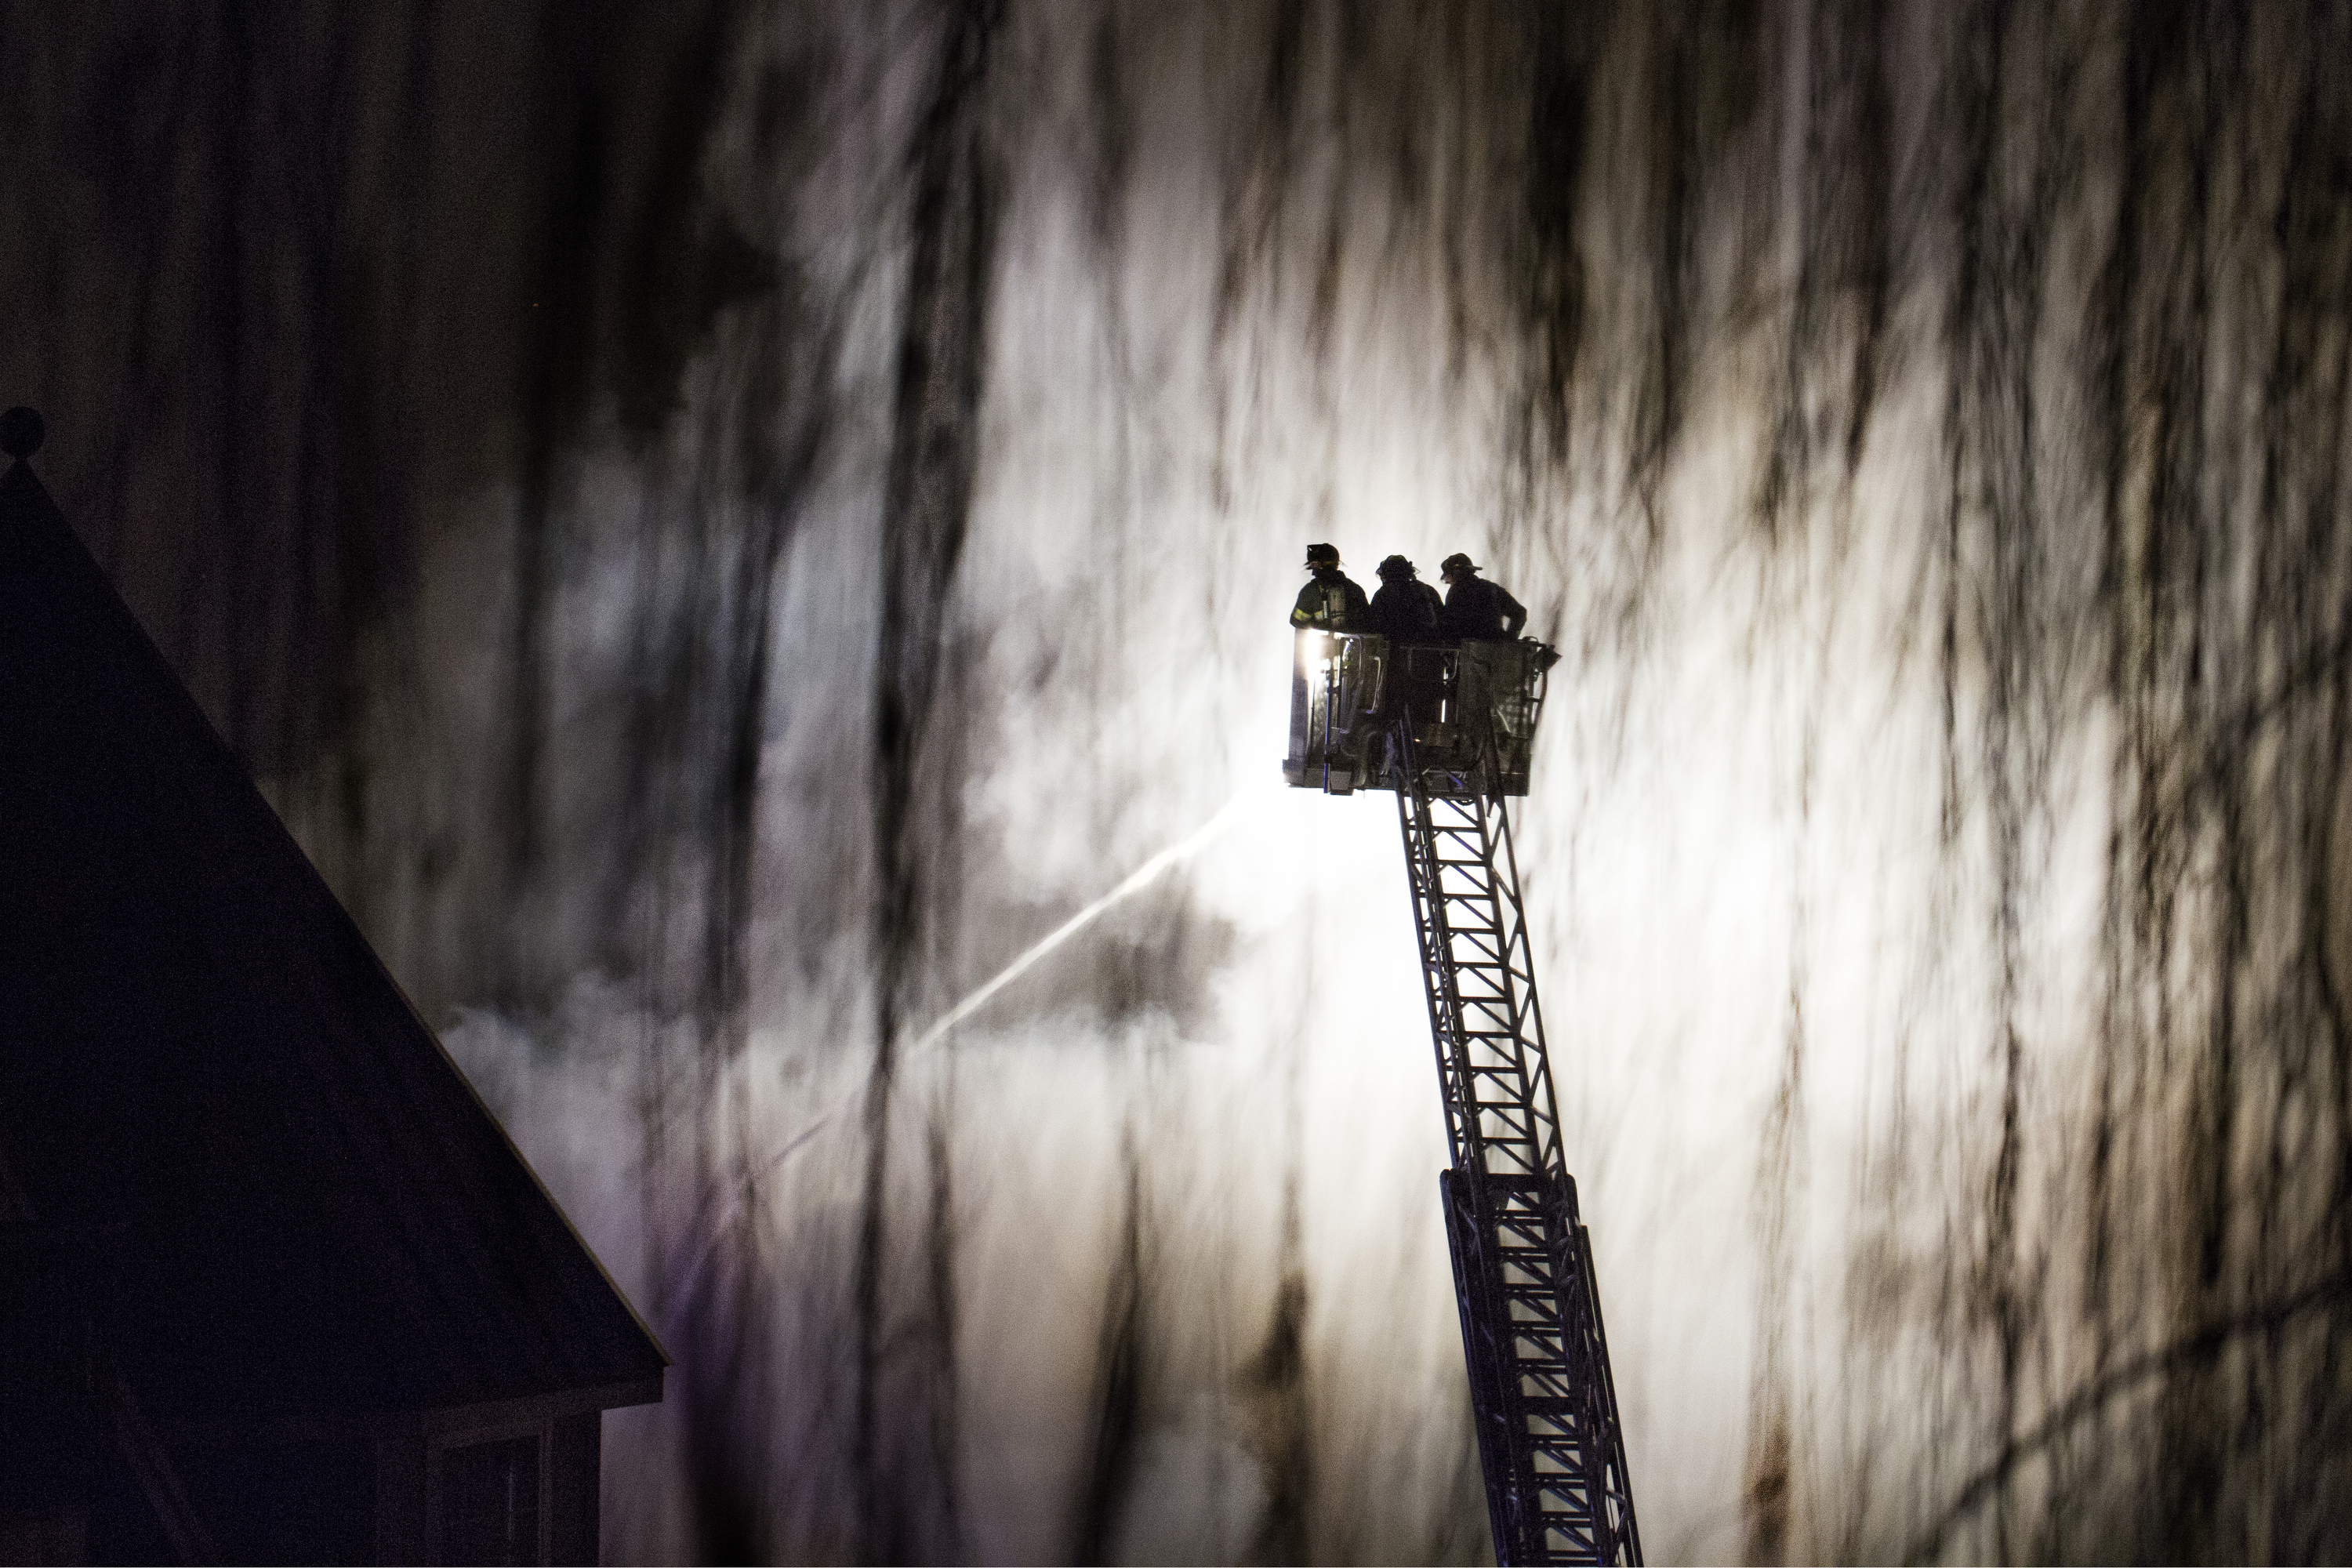 Firefighters of the Ramsey fire department project water onto the Avalon apartment complex during a 5-alarm fire on Tuesday, Jan. 21, 2015 in Edgewater, N.J.  The fire, which displaced some 1,000 people was caused by a plumbing repair that ignited a fire in the wall which then spread through the building.  No fatalities were reported.